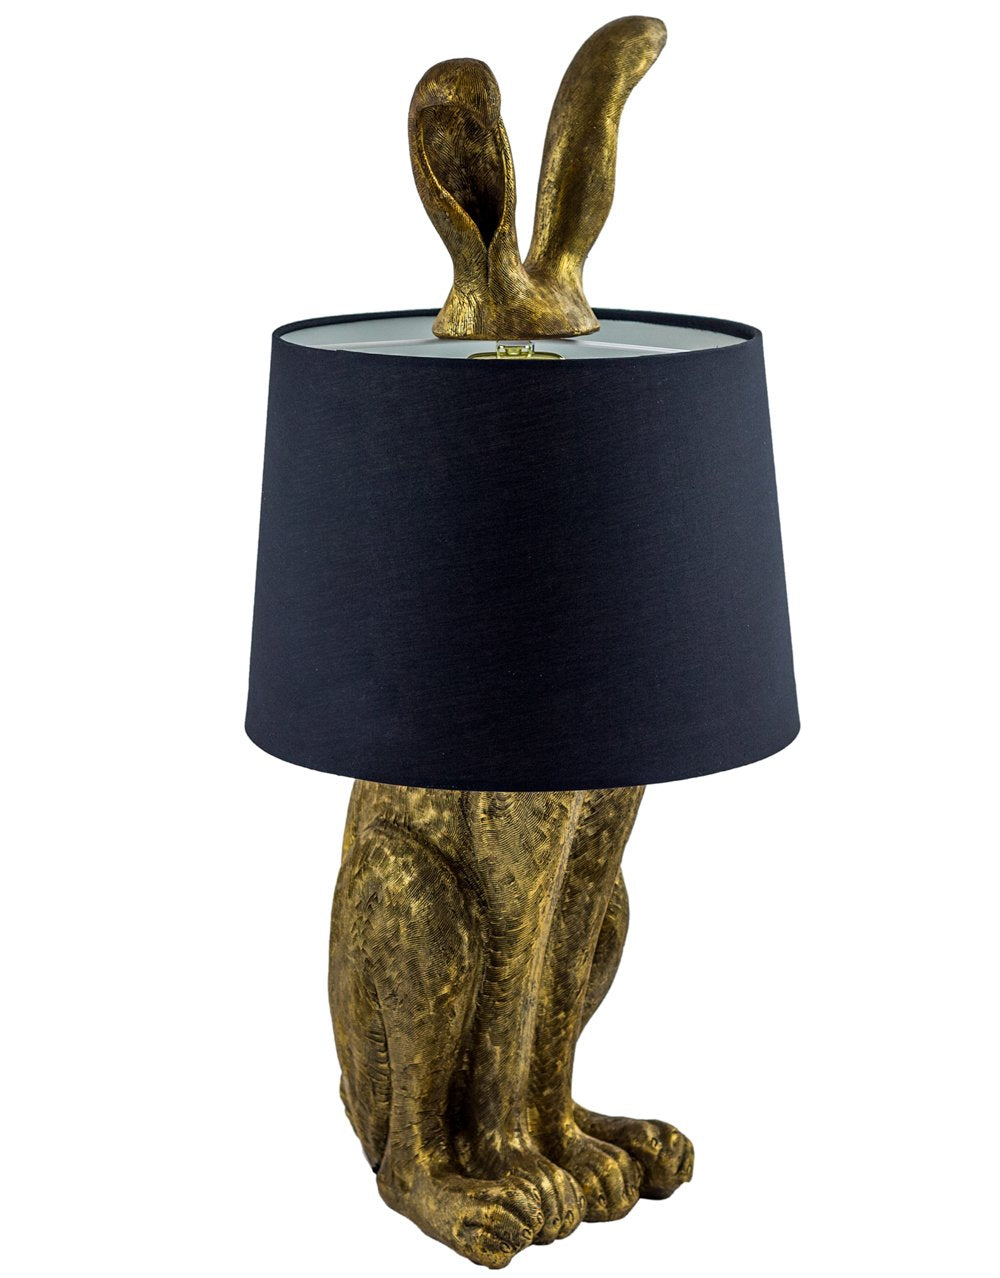 GOLD RABBIT LAMP WITH BLACK SHADE